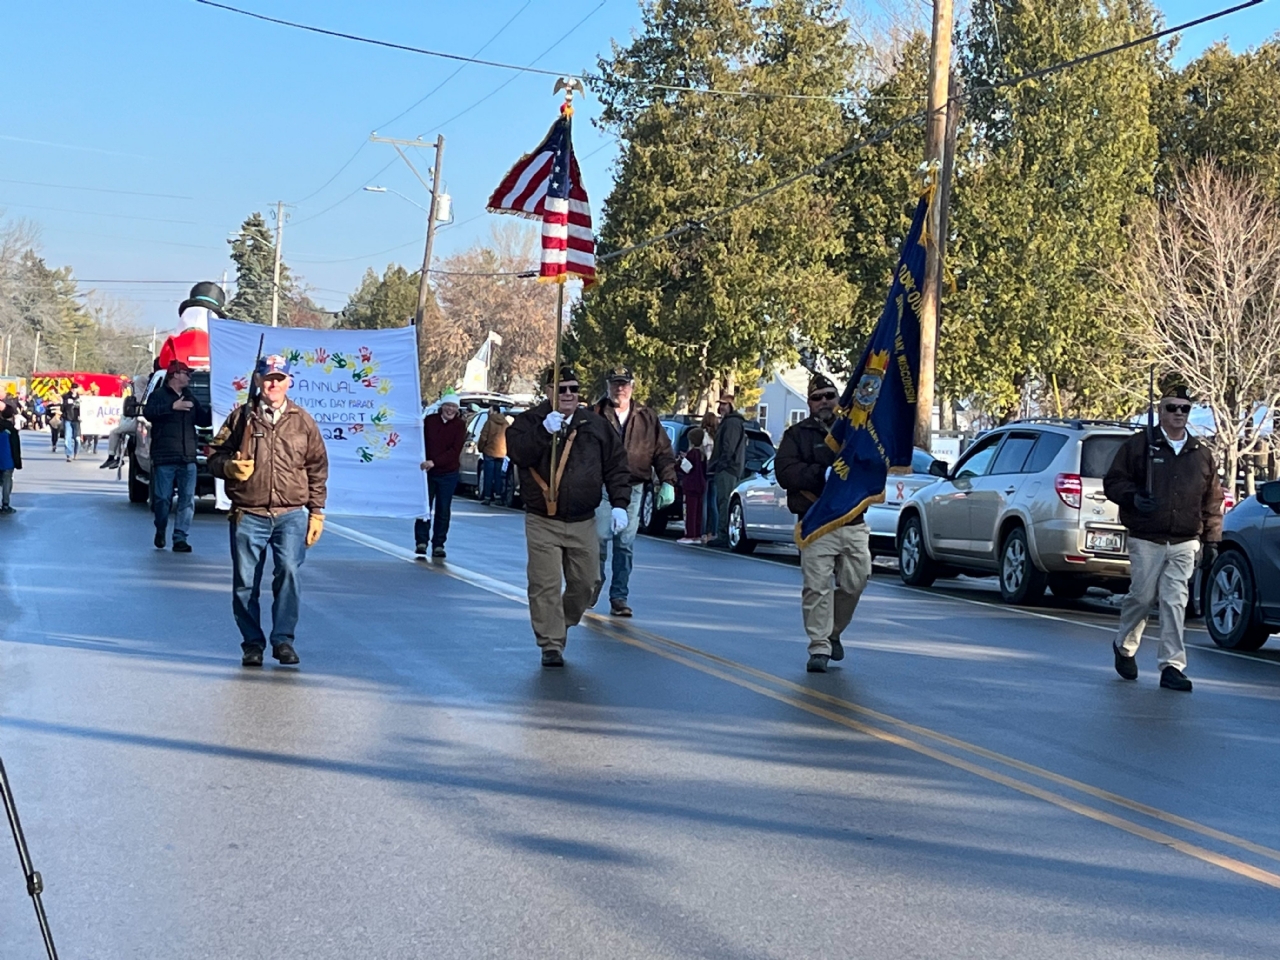 Post 3088 led the Thanksgiving Day Parade in Jacksonport